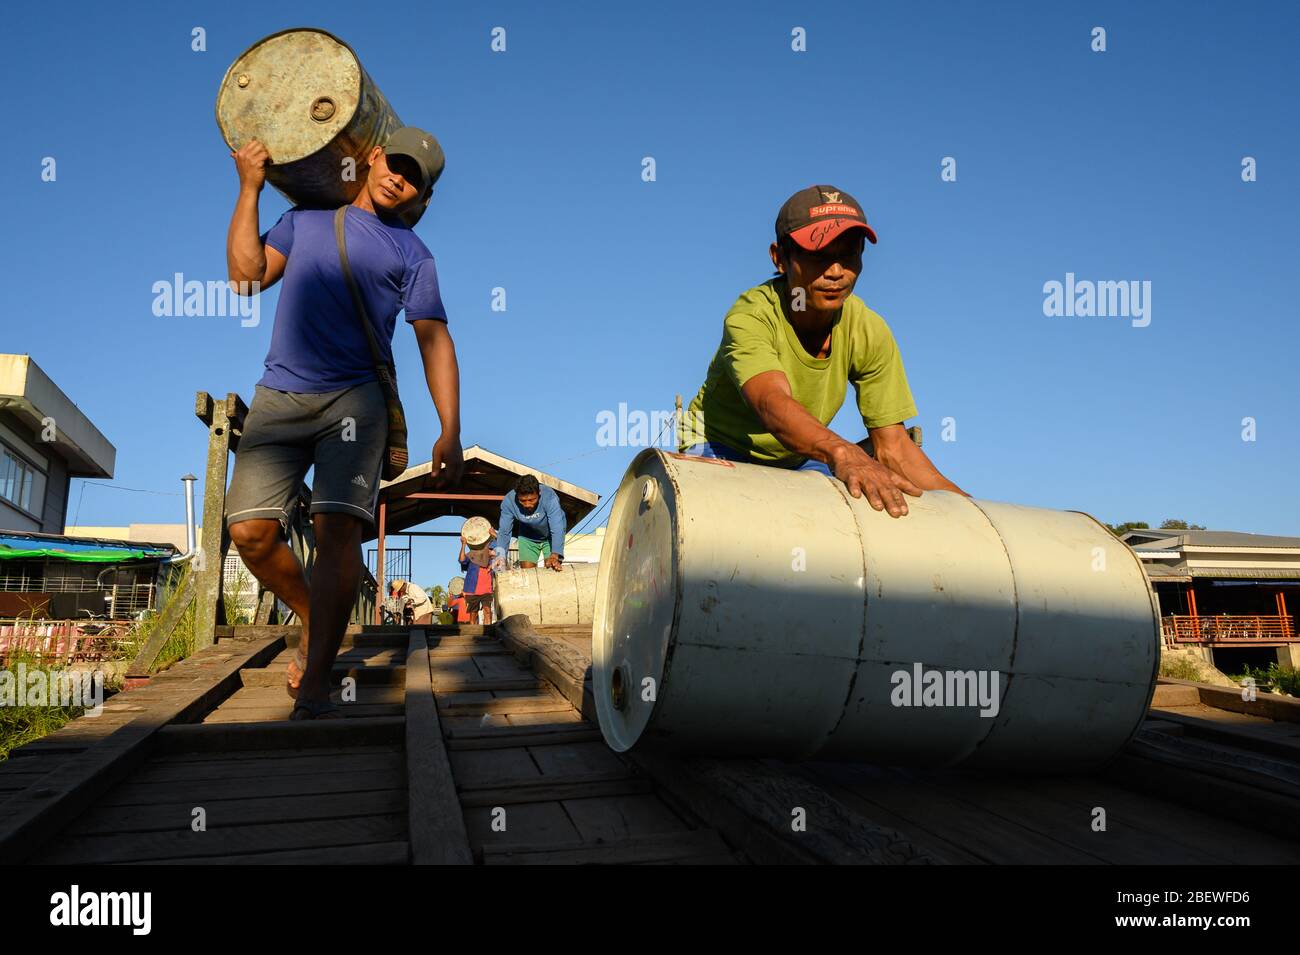 Men carrying and rolling drums to a boat, Pathein, Myanmar Stock Photo